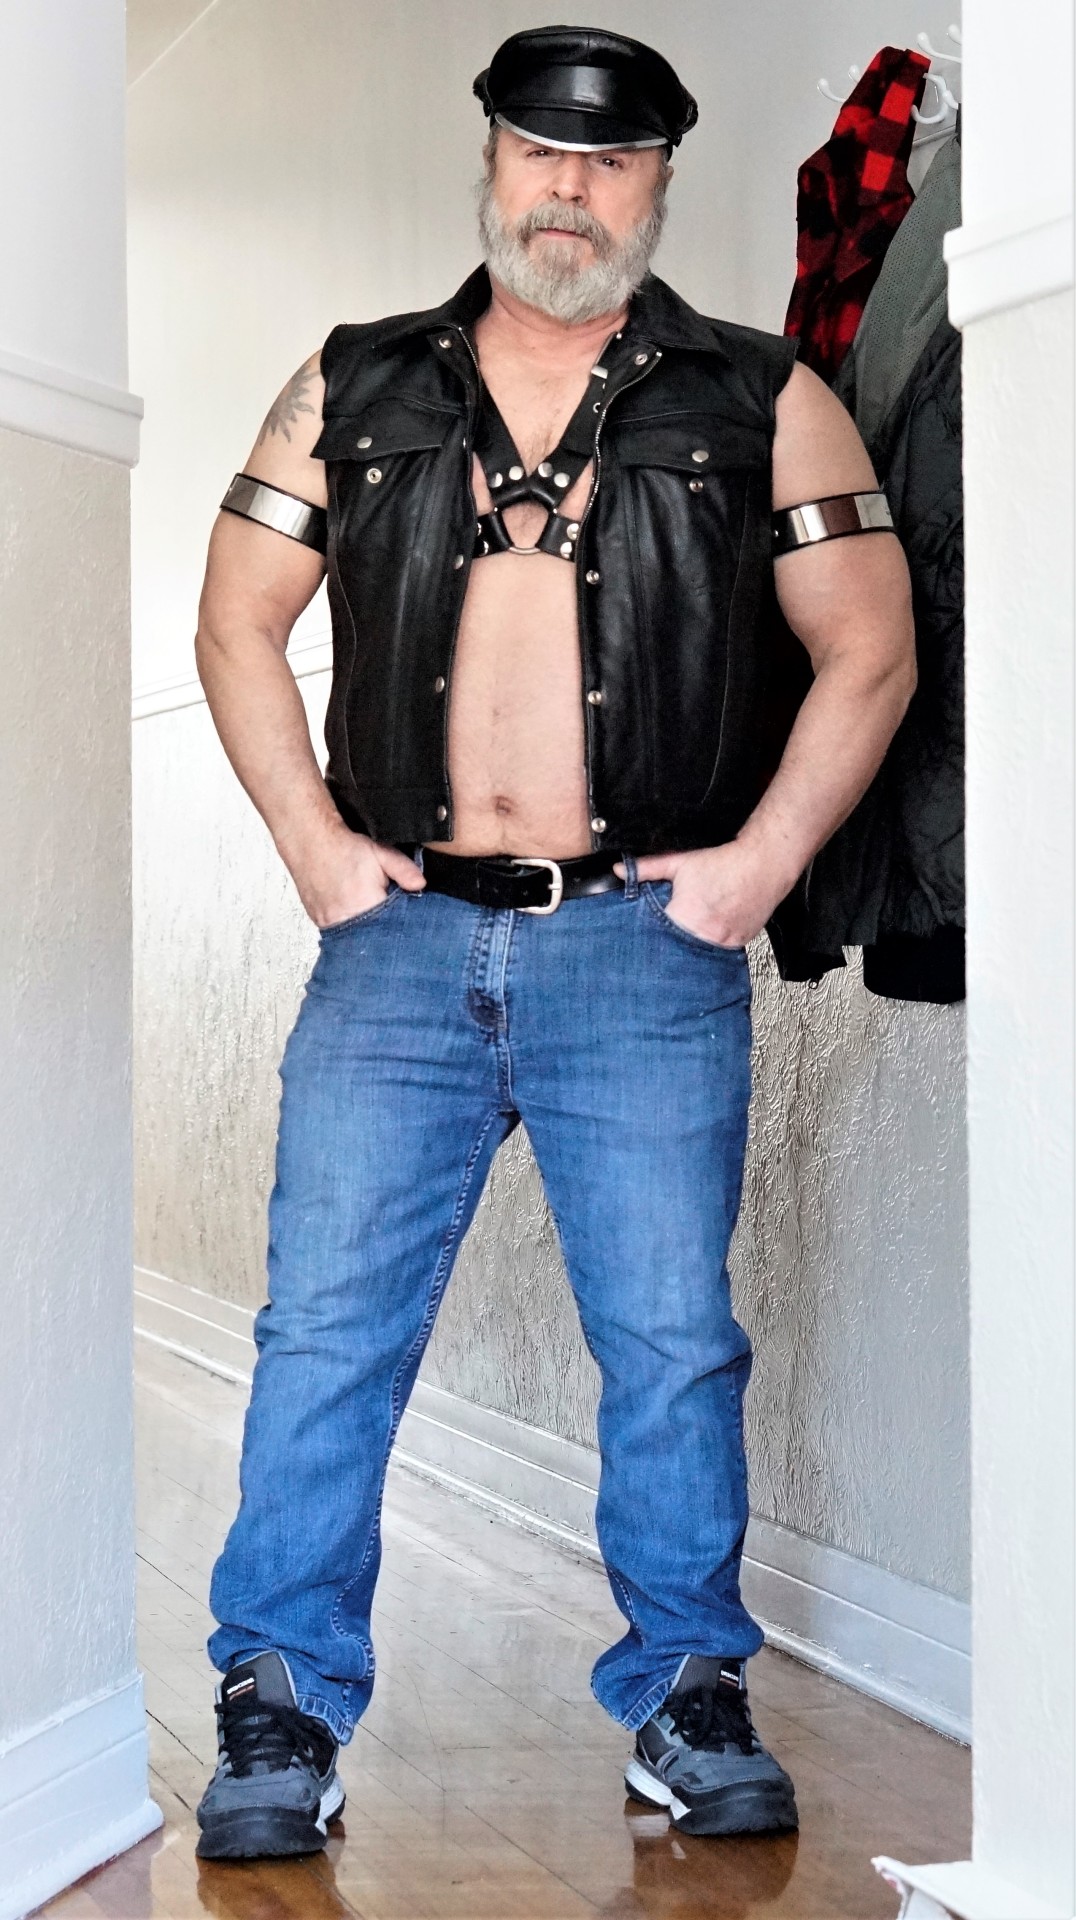 BEAR LEATHER RUBBER on Tumblr